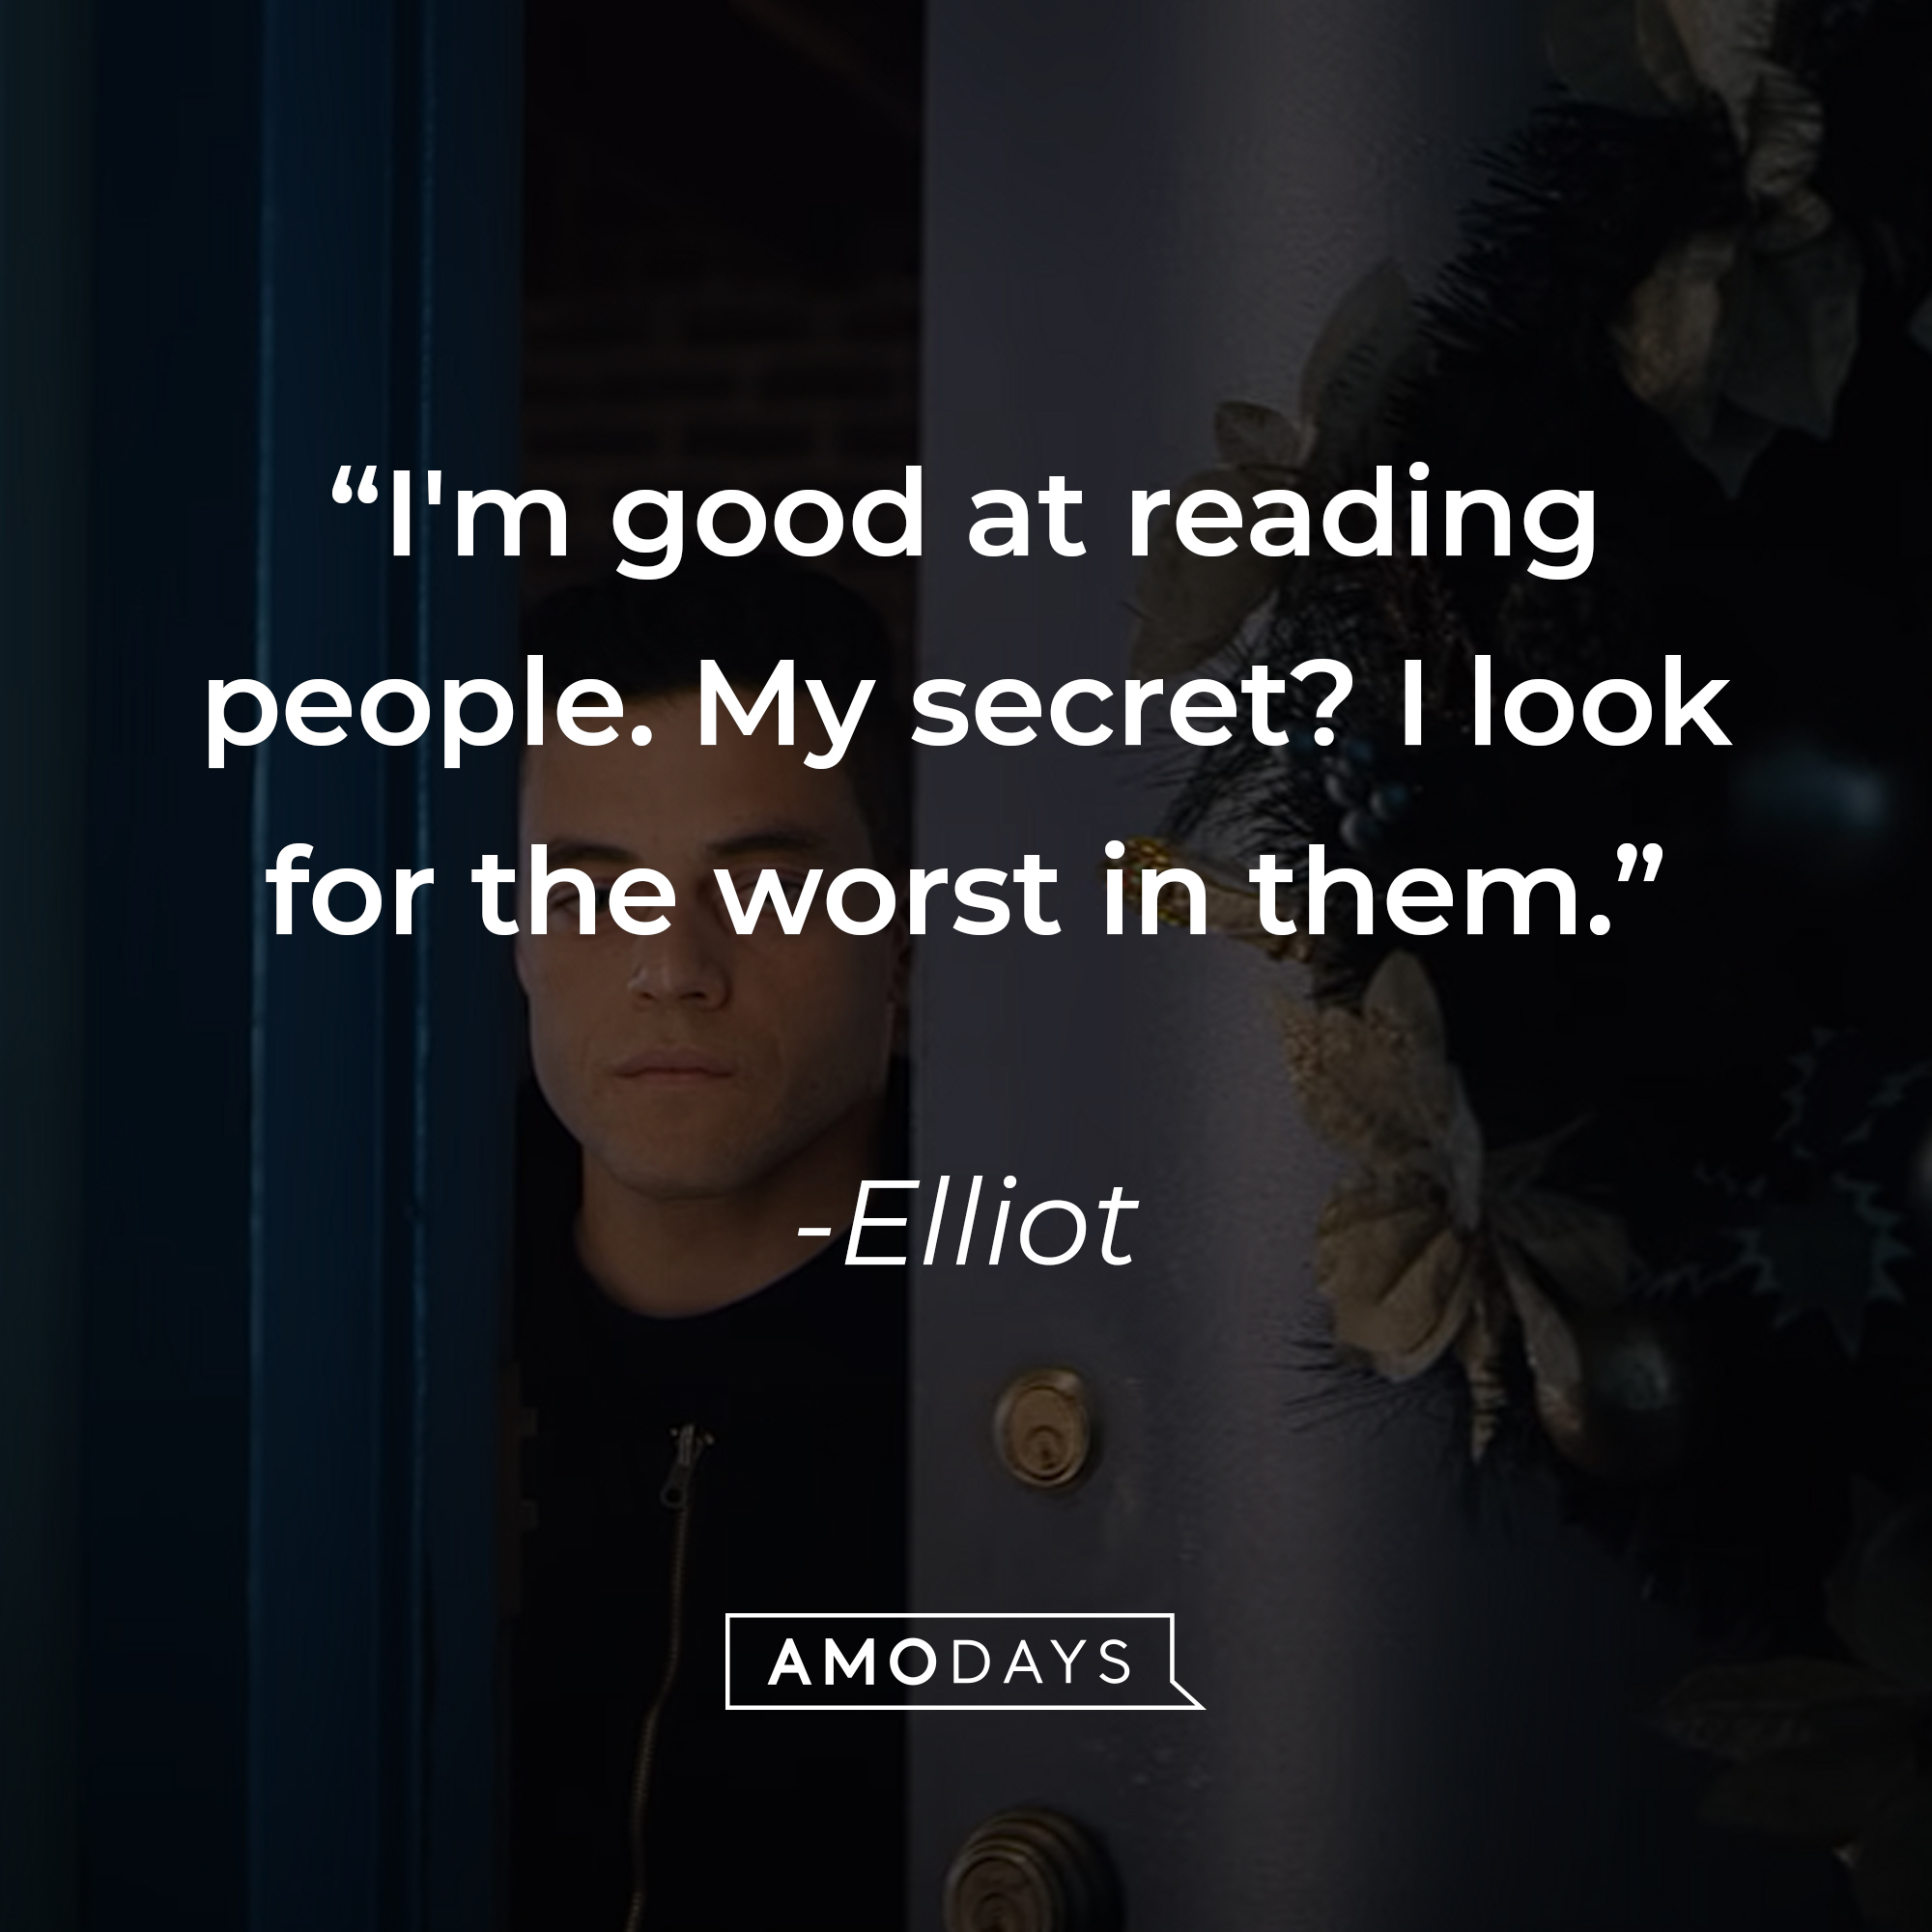 Elliot's quote: "I'm good at reading people. My secret? I look for the worst in them." | Source: youtube.com/MrRobot